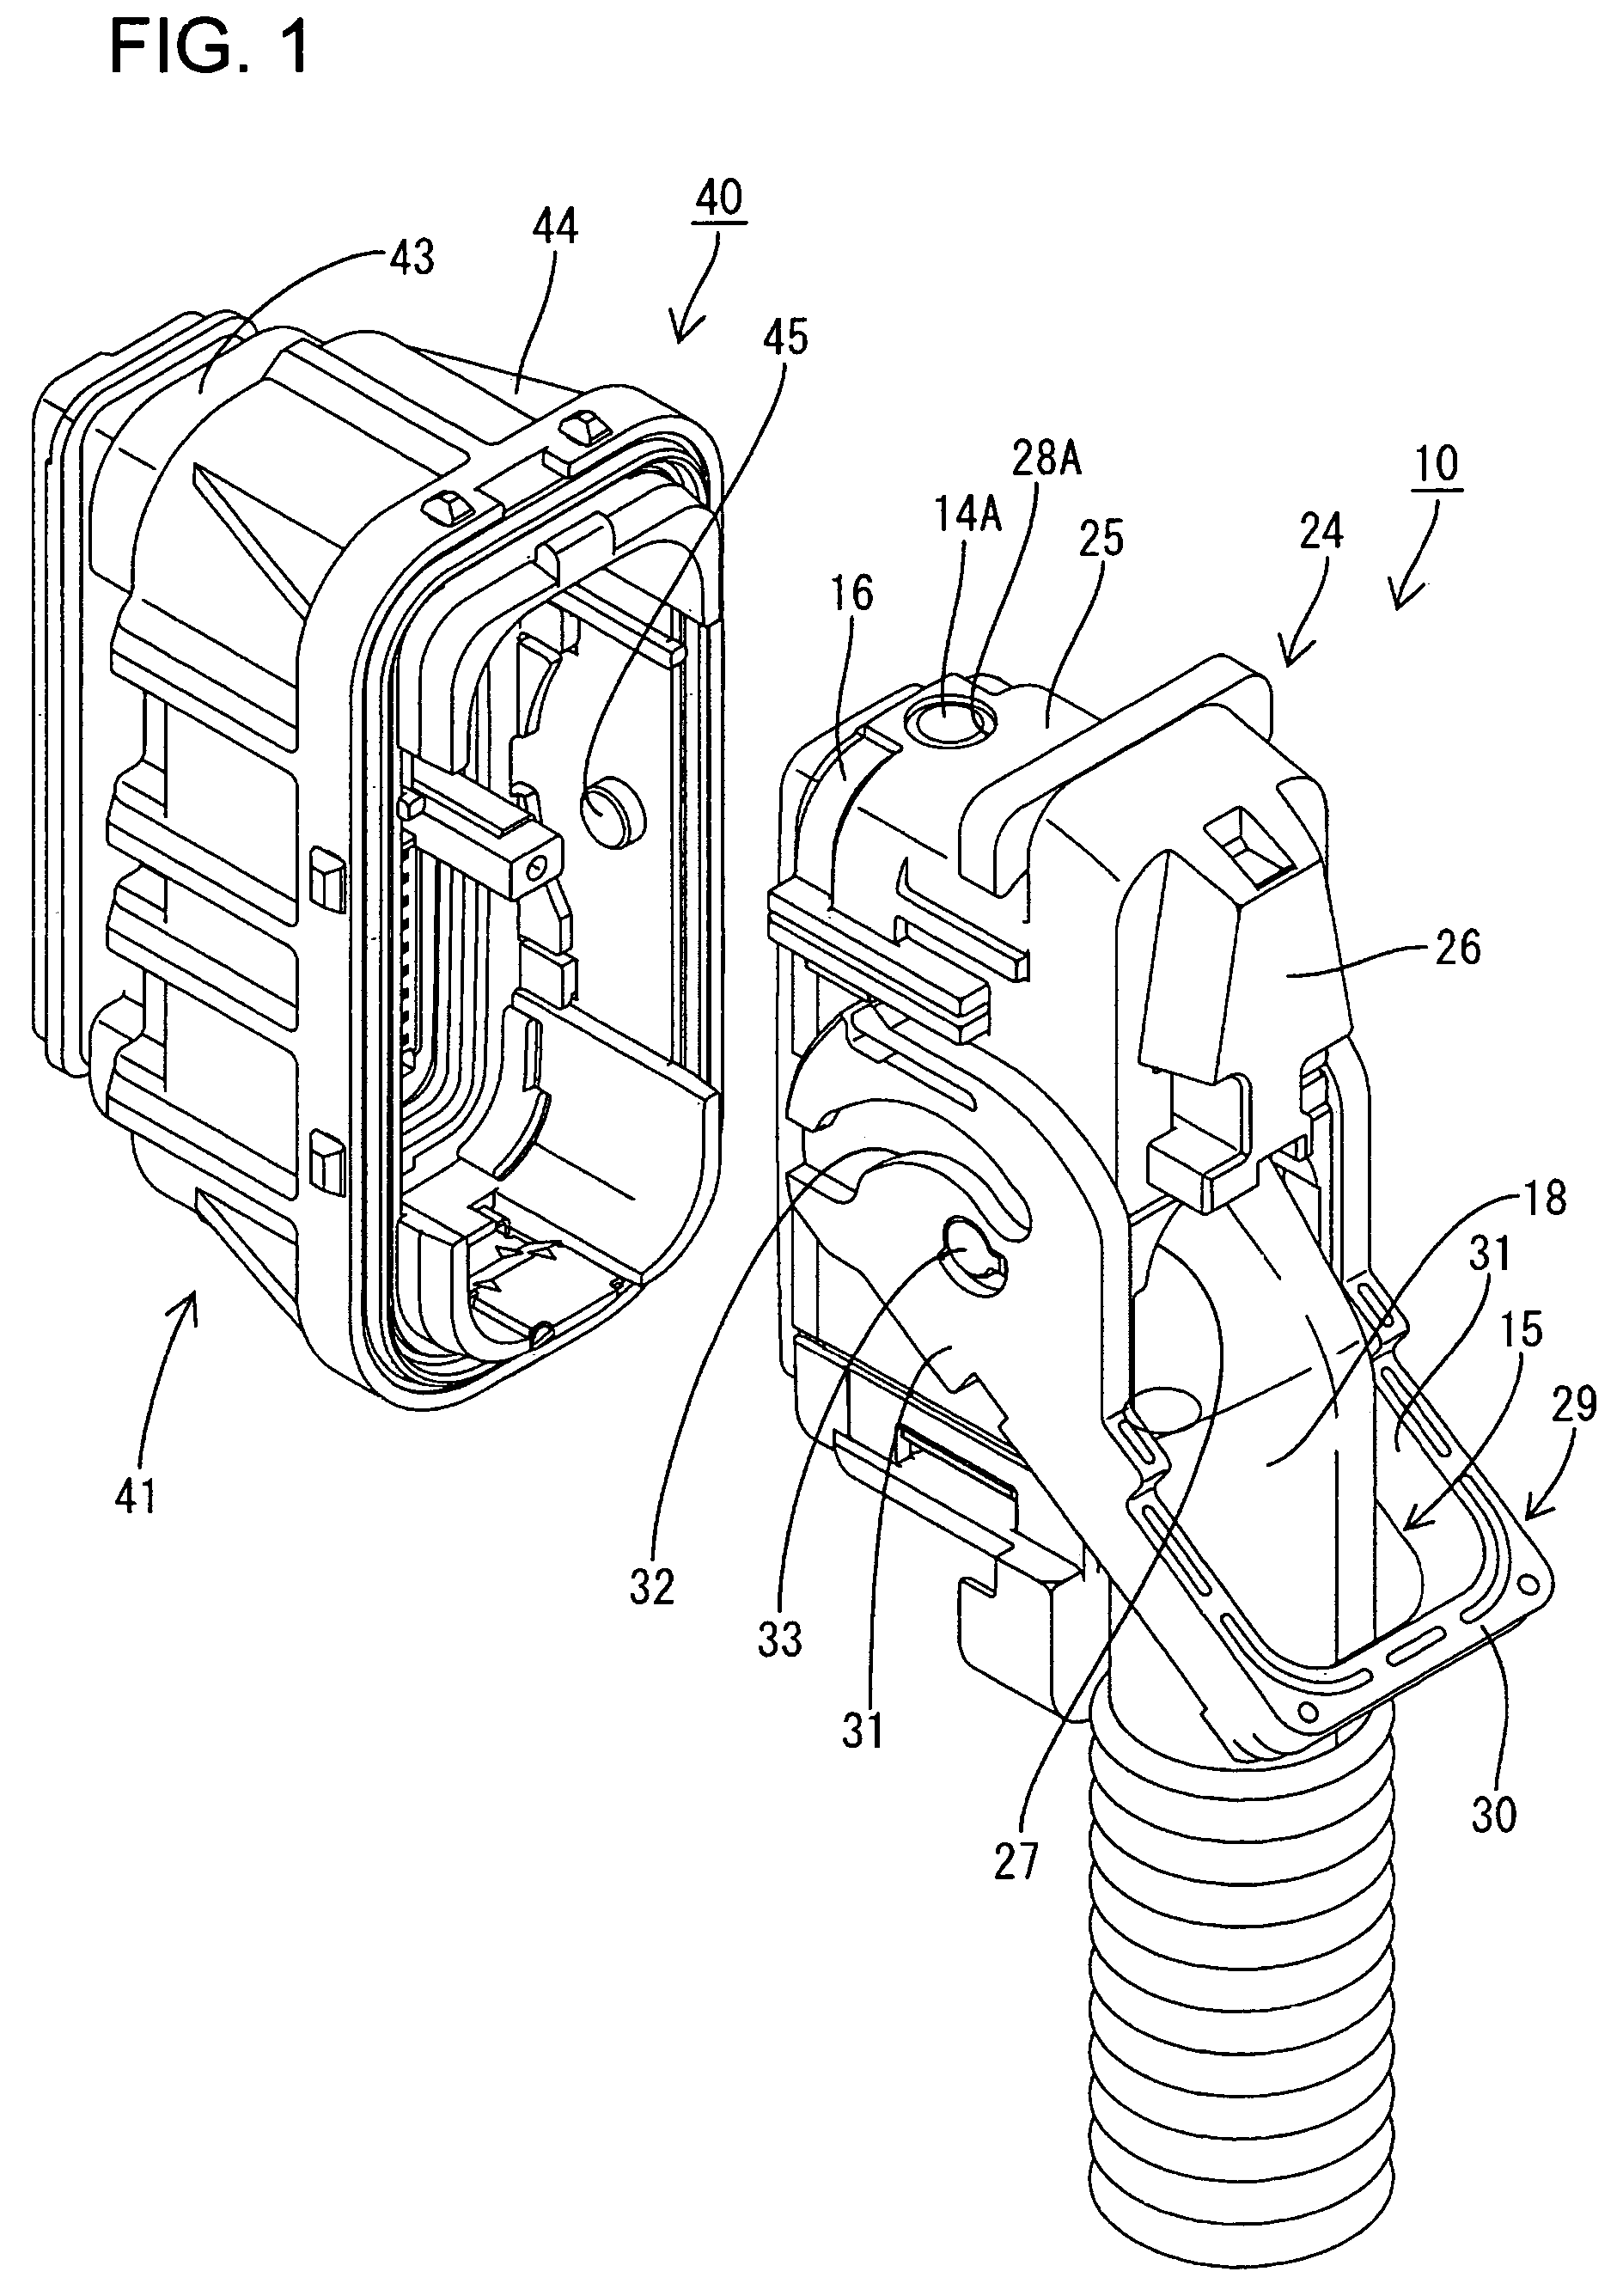 Connector with a sealing boot having inner and outer sealing lips